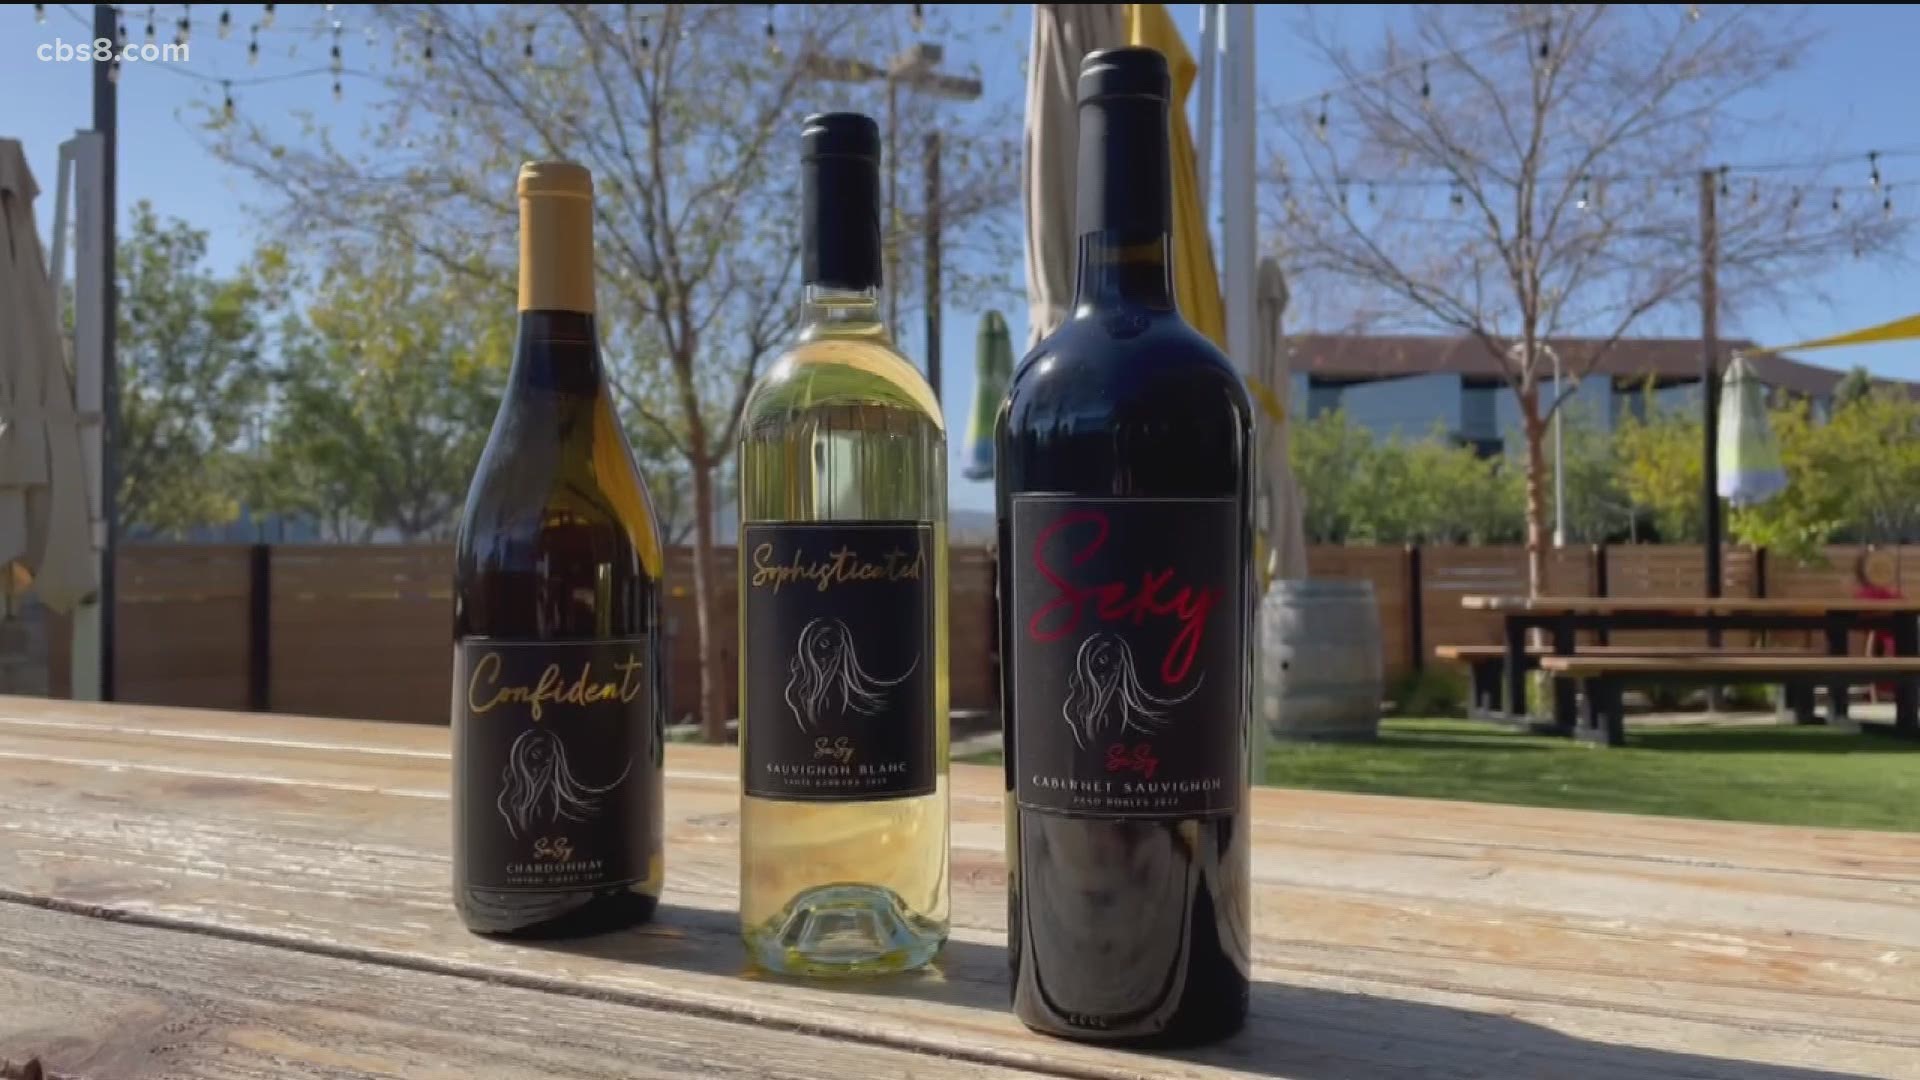 Sasy Wines, which stands for “strong and sexy” is located in Chula Vista.